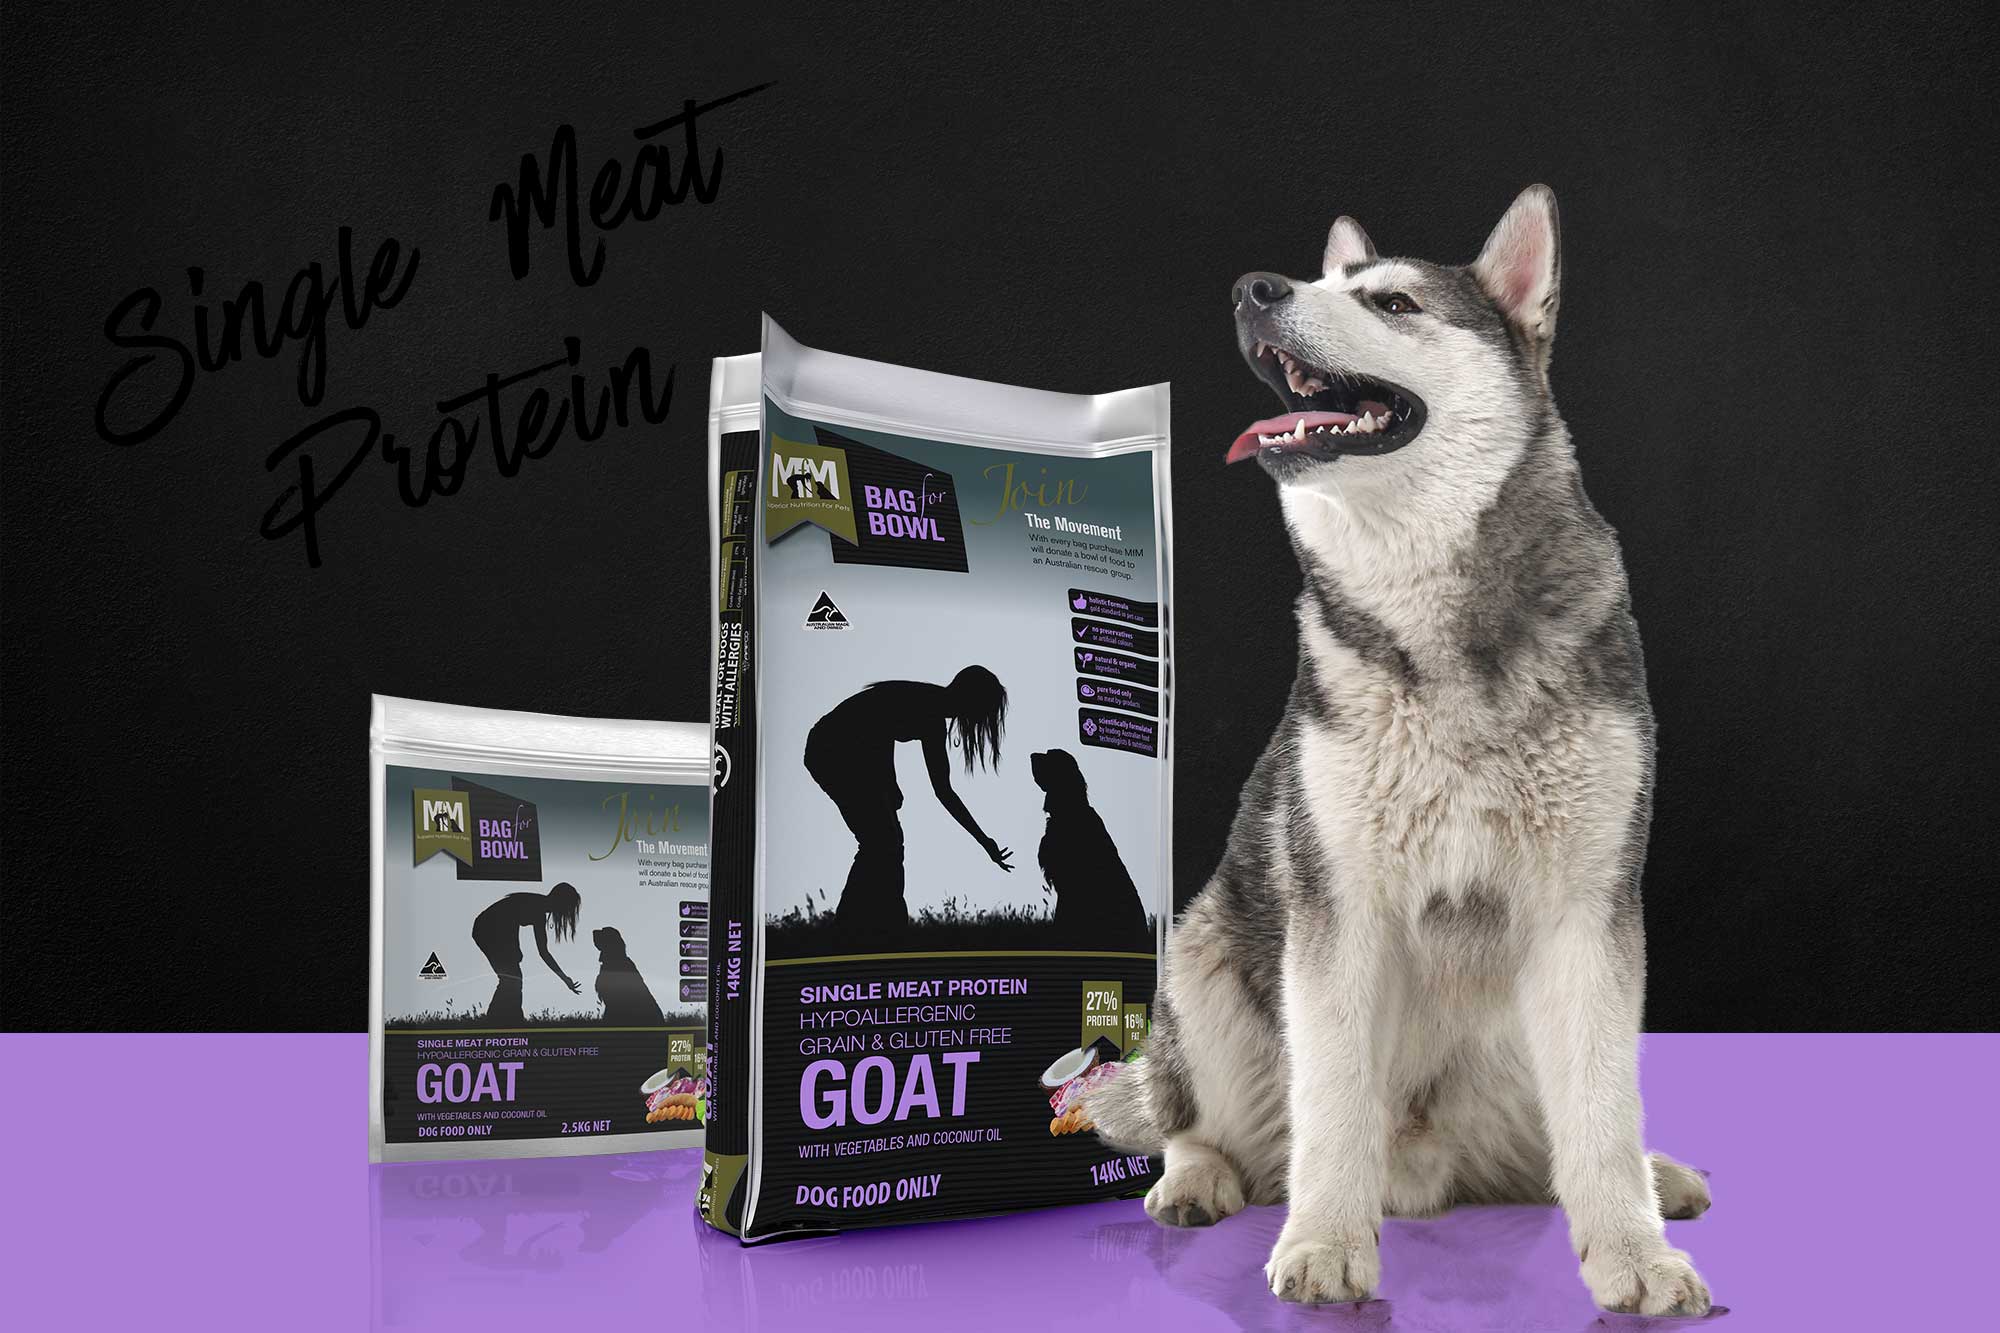 Meals for Mutts Goat Single Meat Protein Dog Food - Promo.